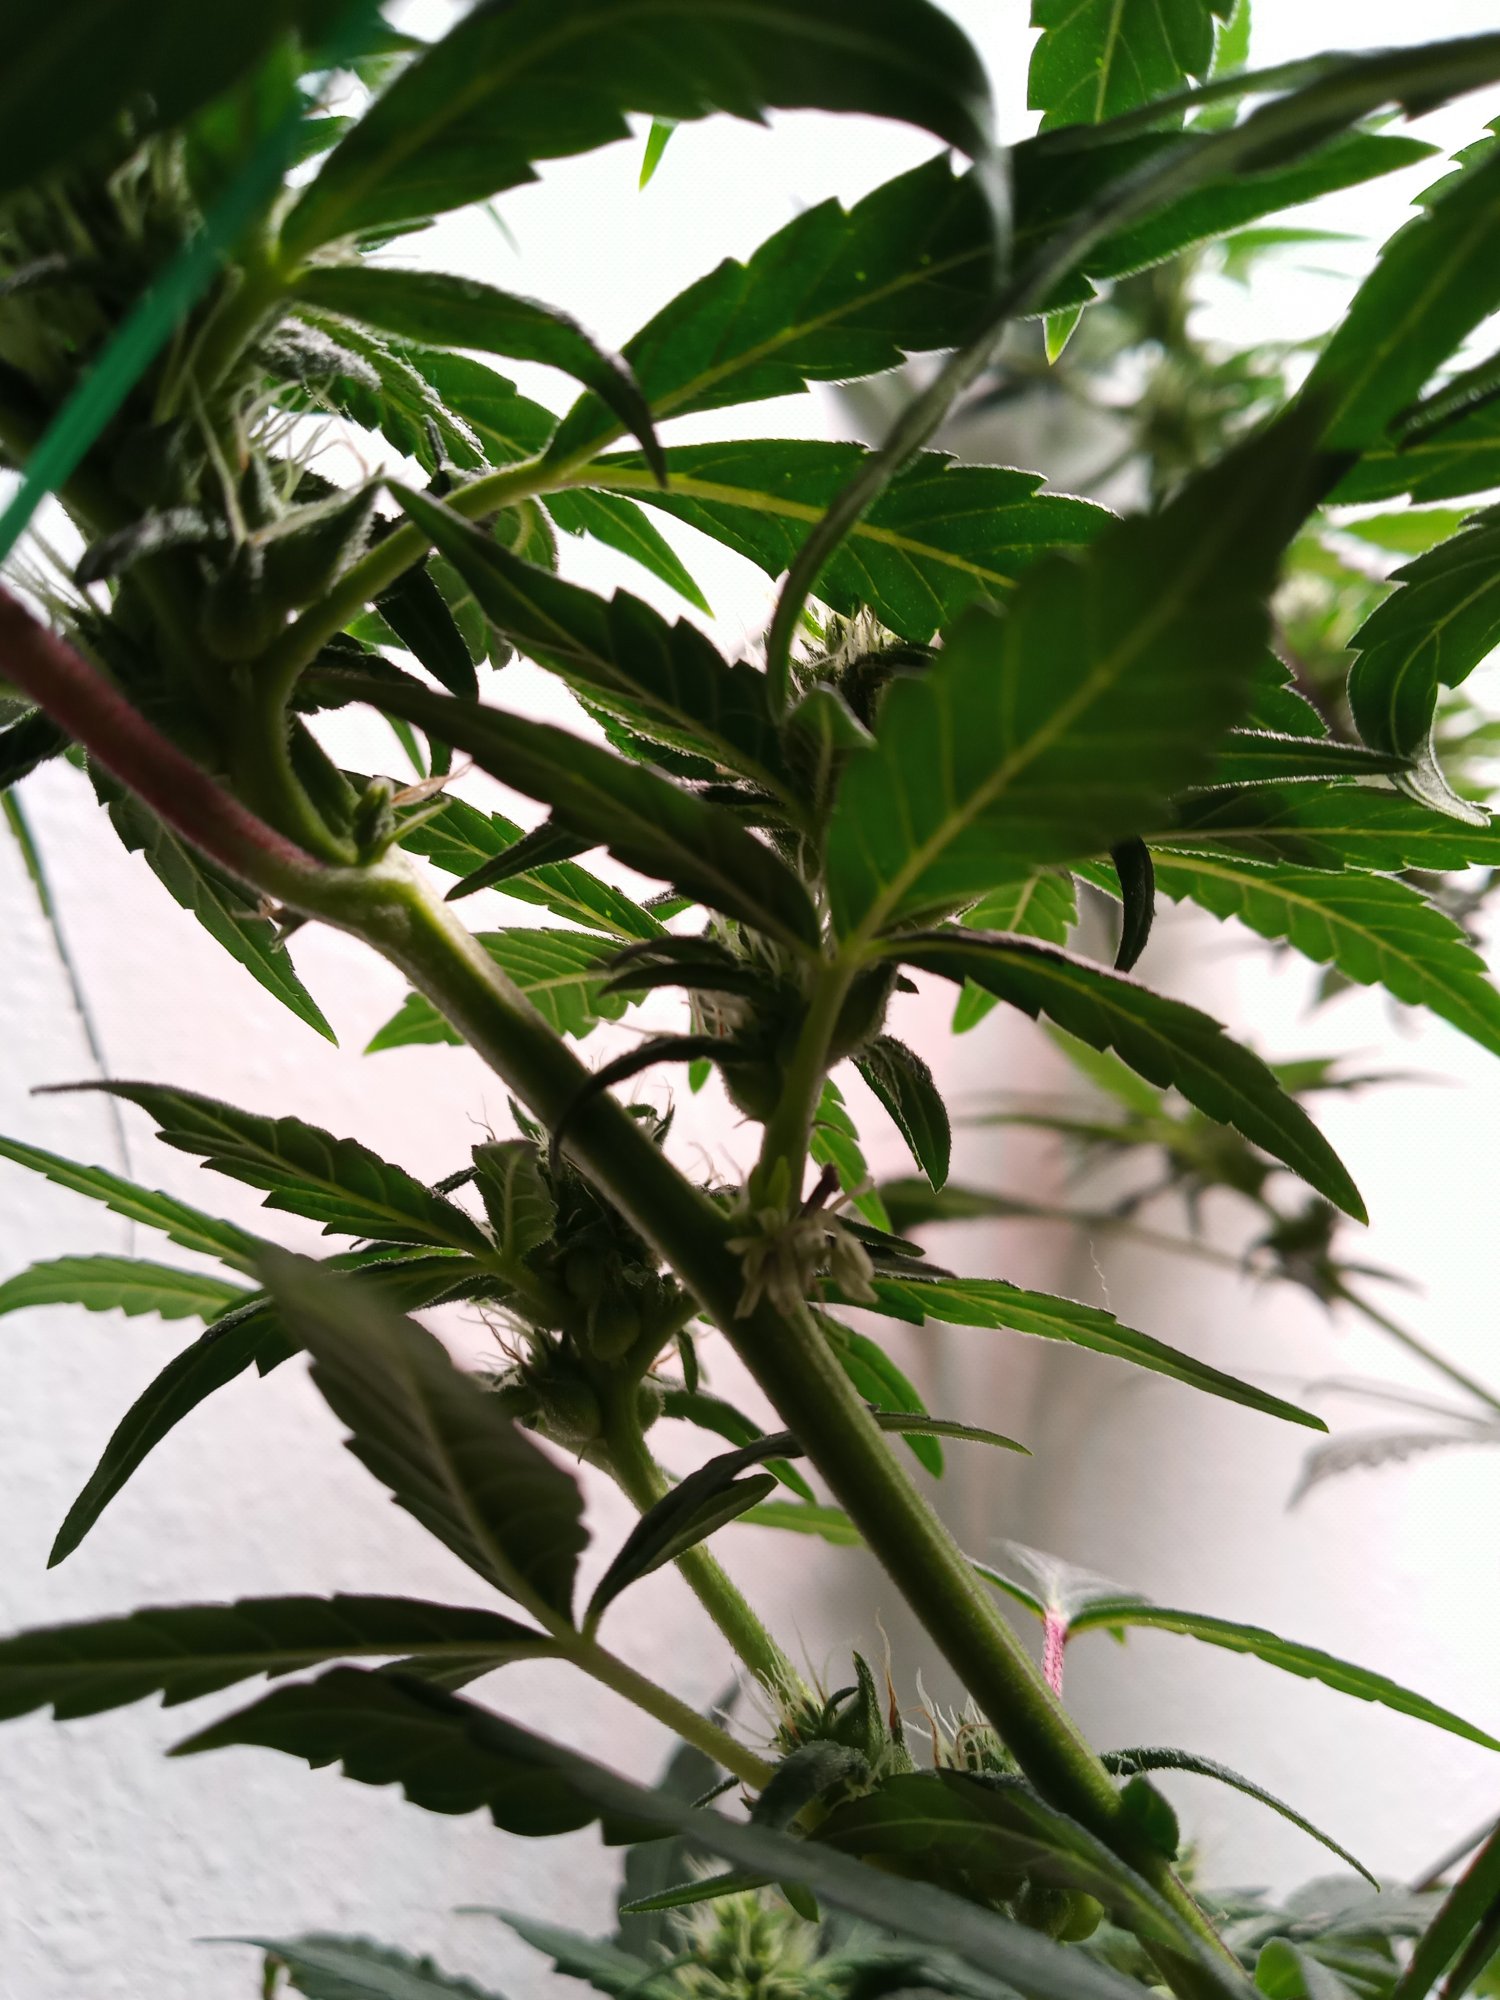 Weird structures on my plant in flower 5